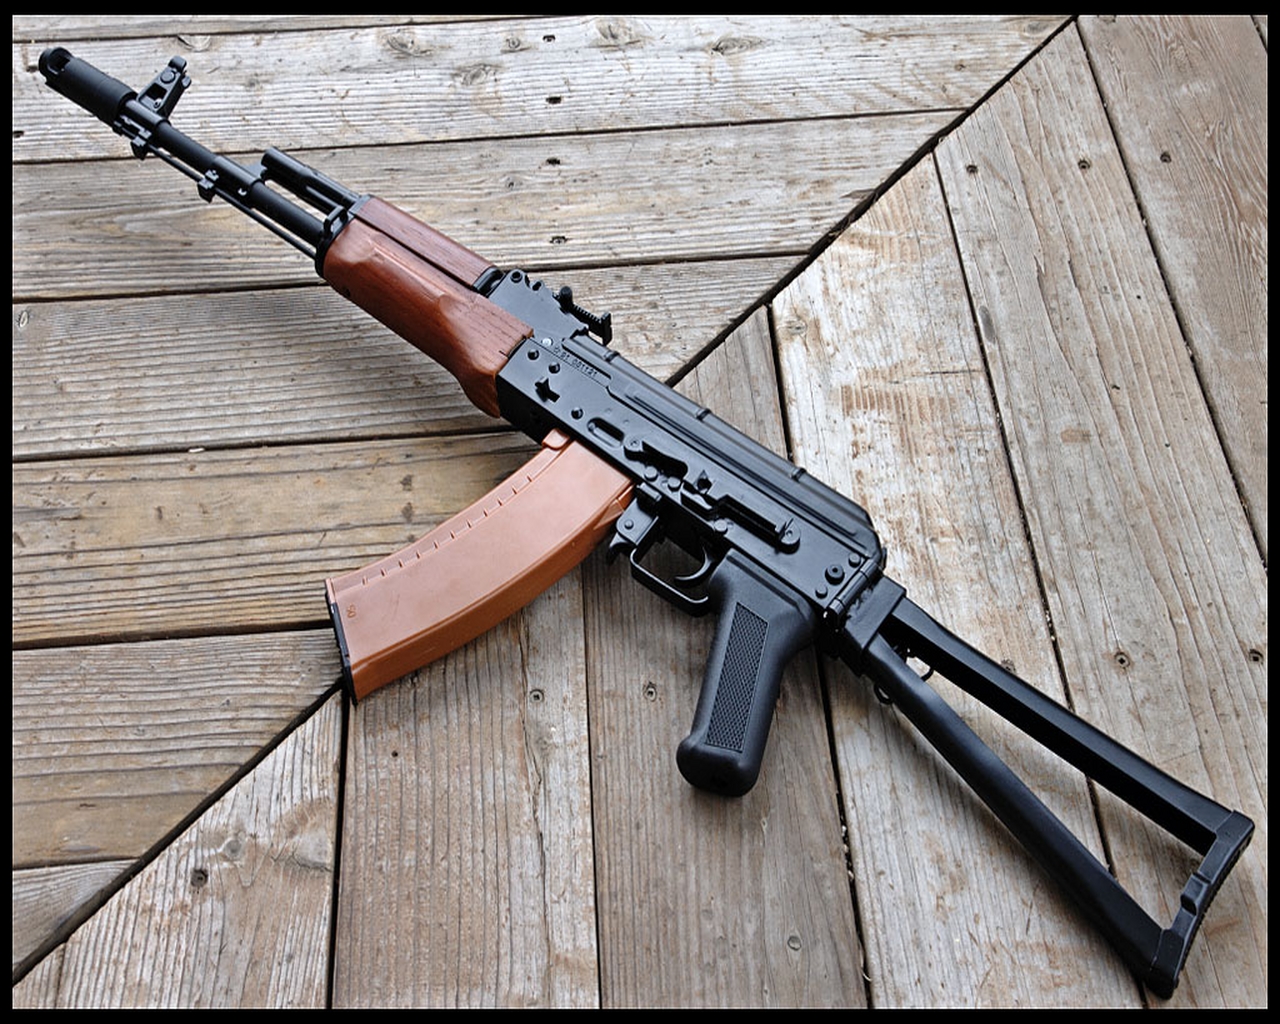 Ak-74 wallpapers, Weapons, HQ Ak-74 pictures | 4K Wallpapers 2019